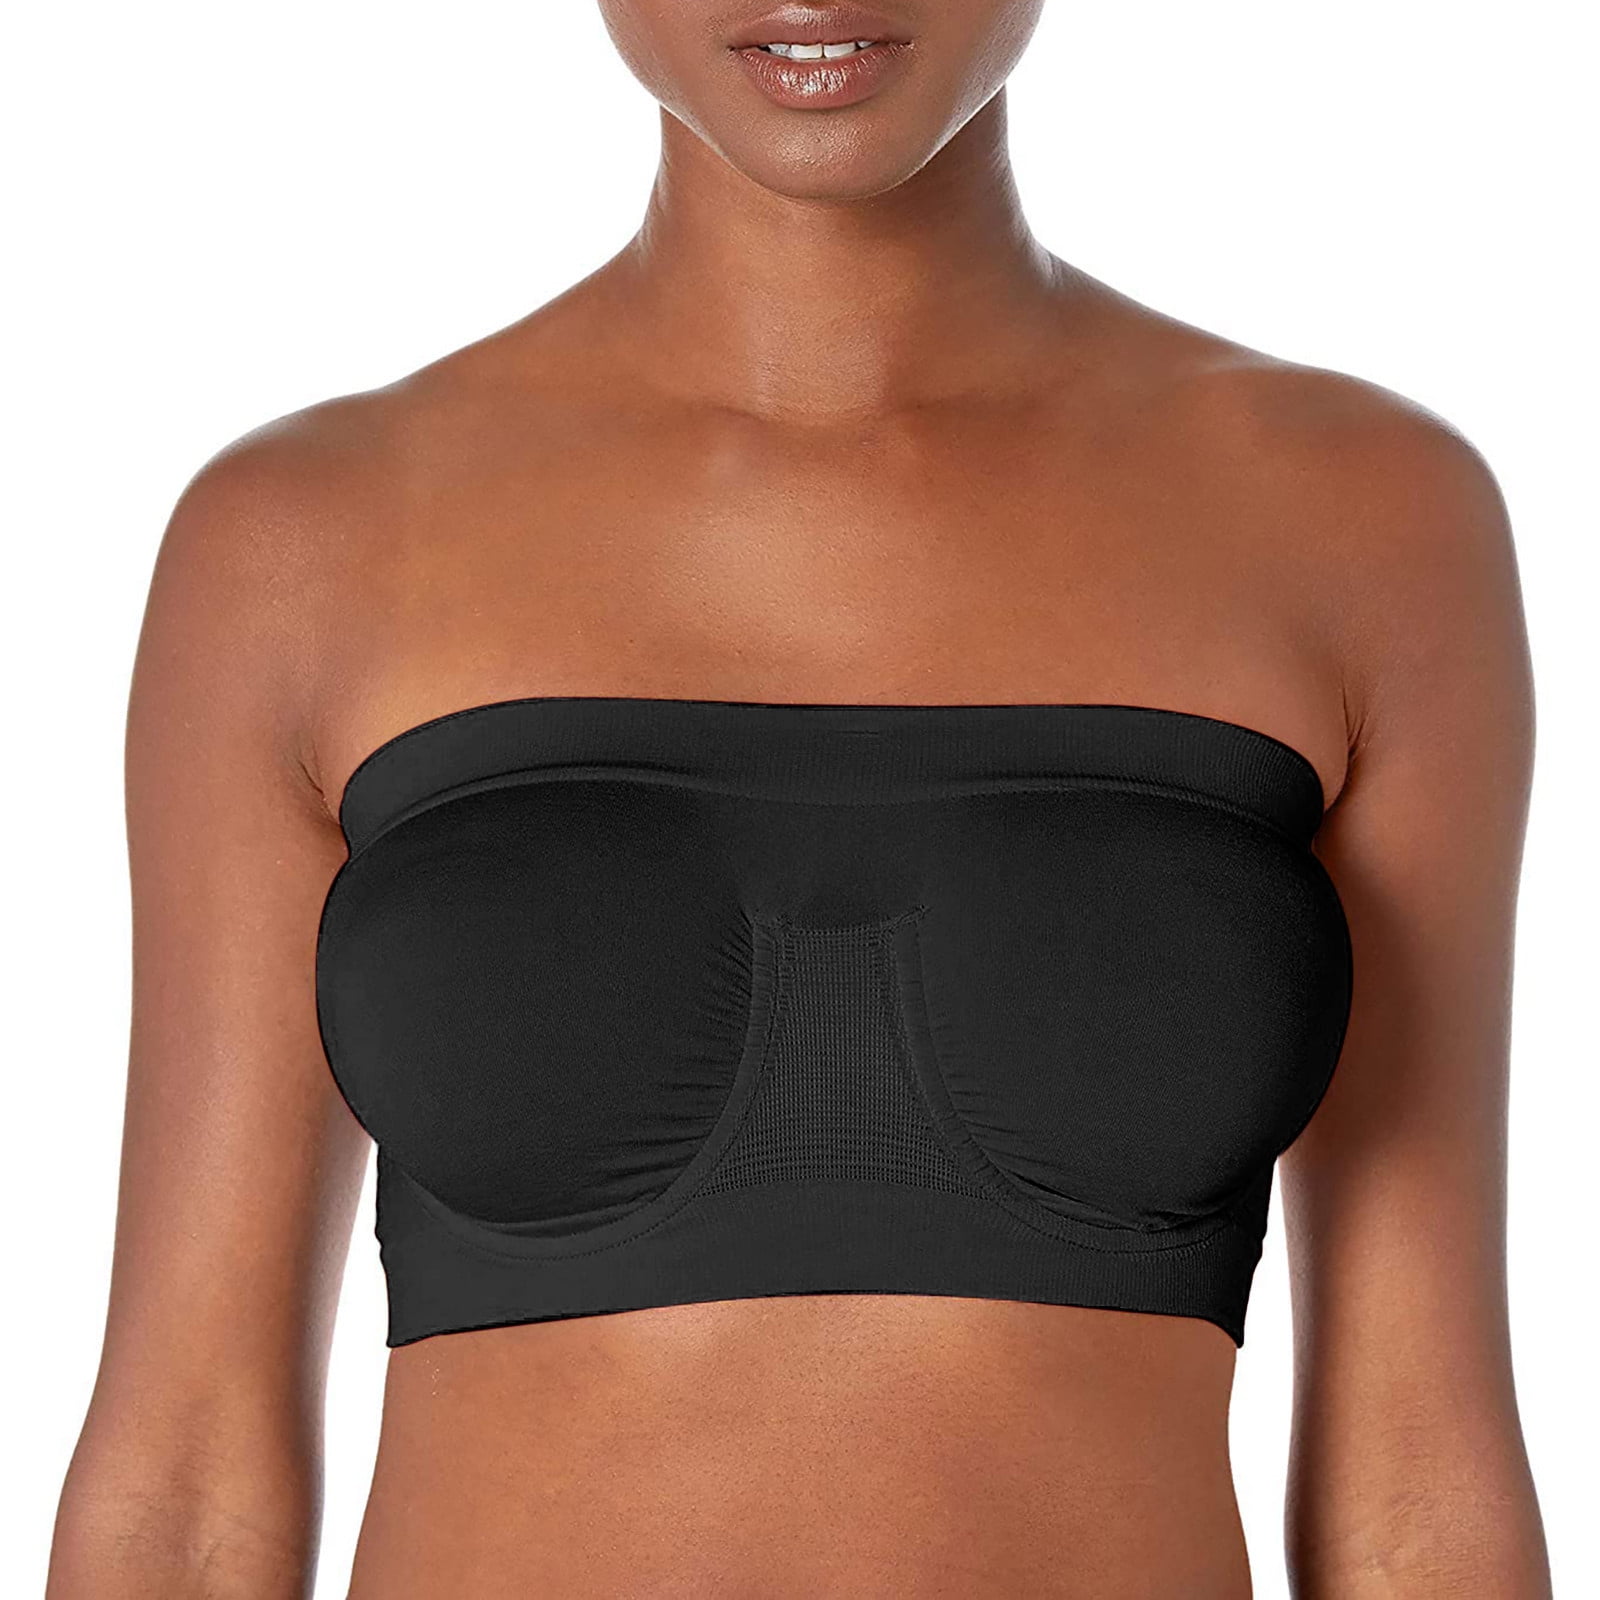 TQWQT Women's Strapless Bra Bandeau Tube Top Invisible Bra for Small Chests  Seamless Wireless Solid Bra Fitness Bras Underwear,Black XXL